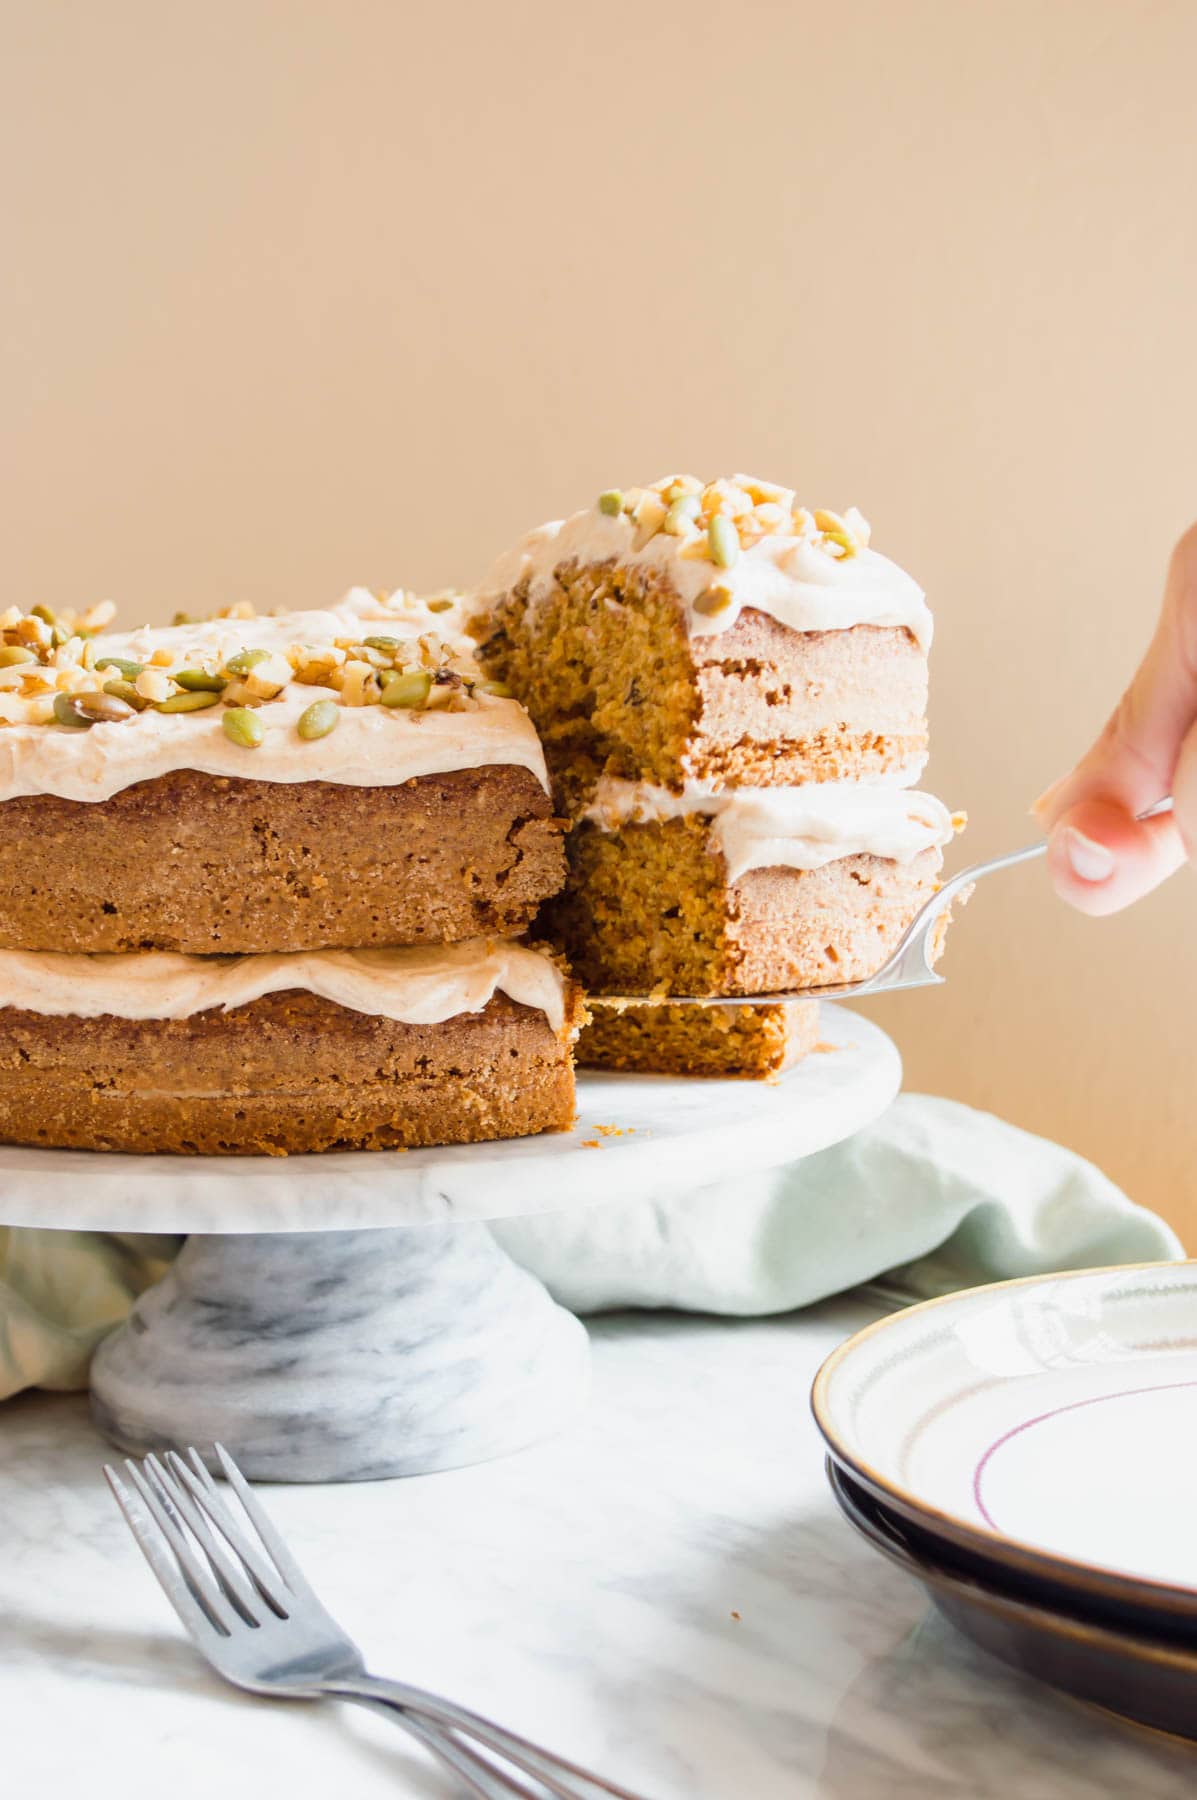 Serving slice of Carrot Cake with Chai Spiced Frosting.